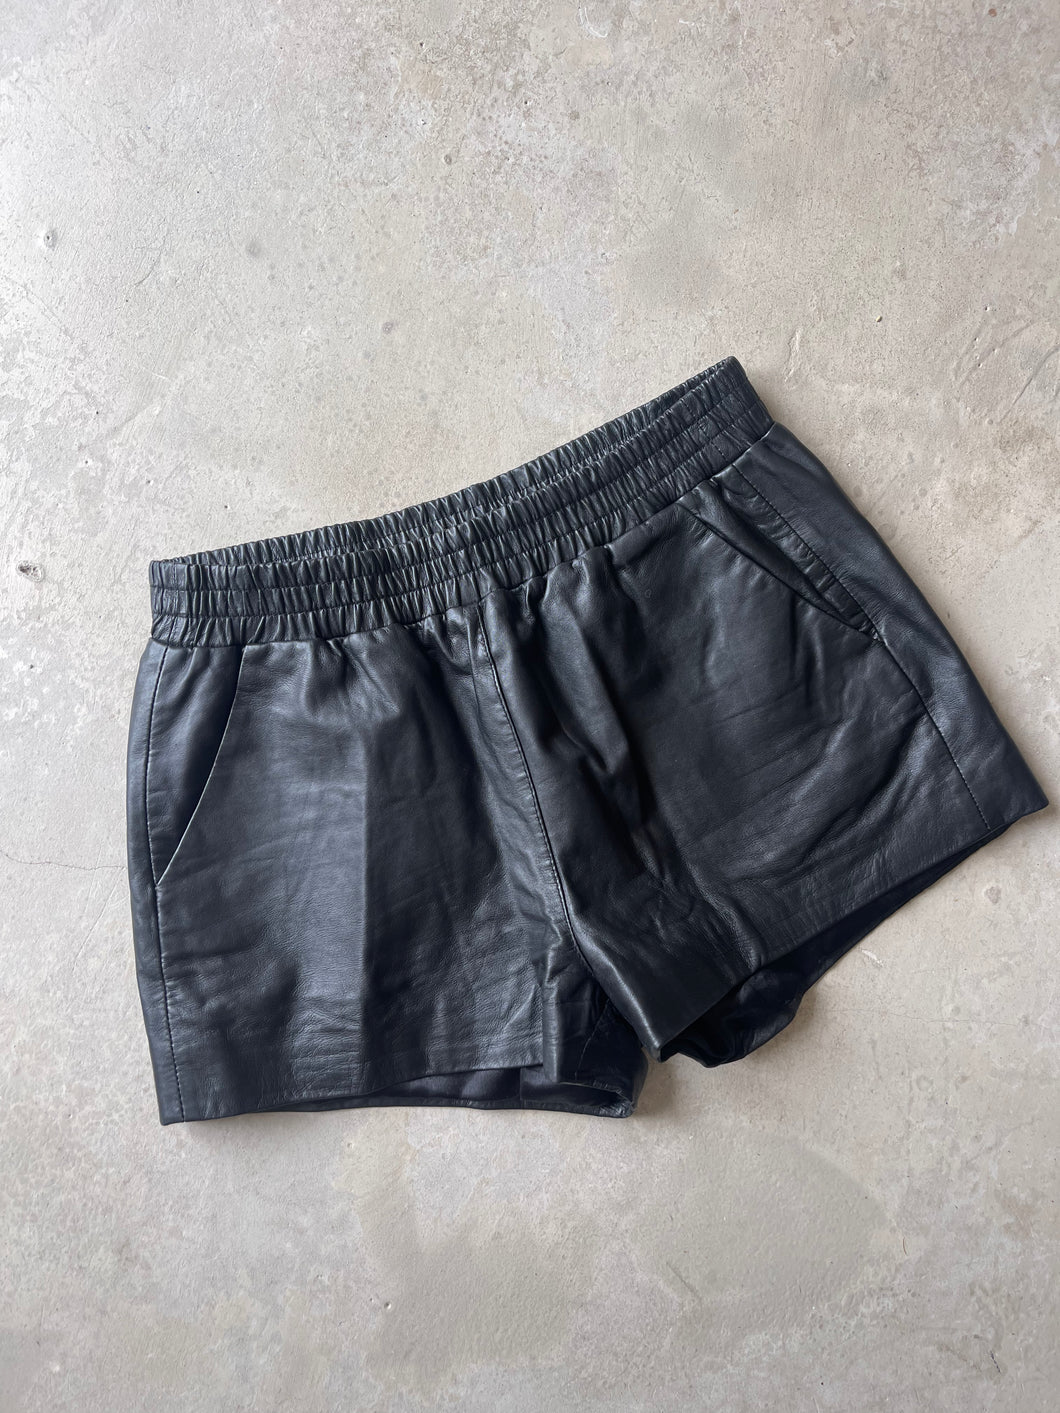 Topshop Real Leather Shorts